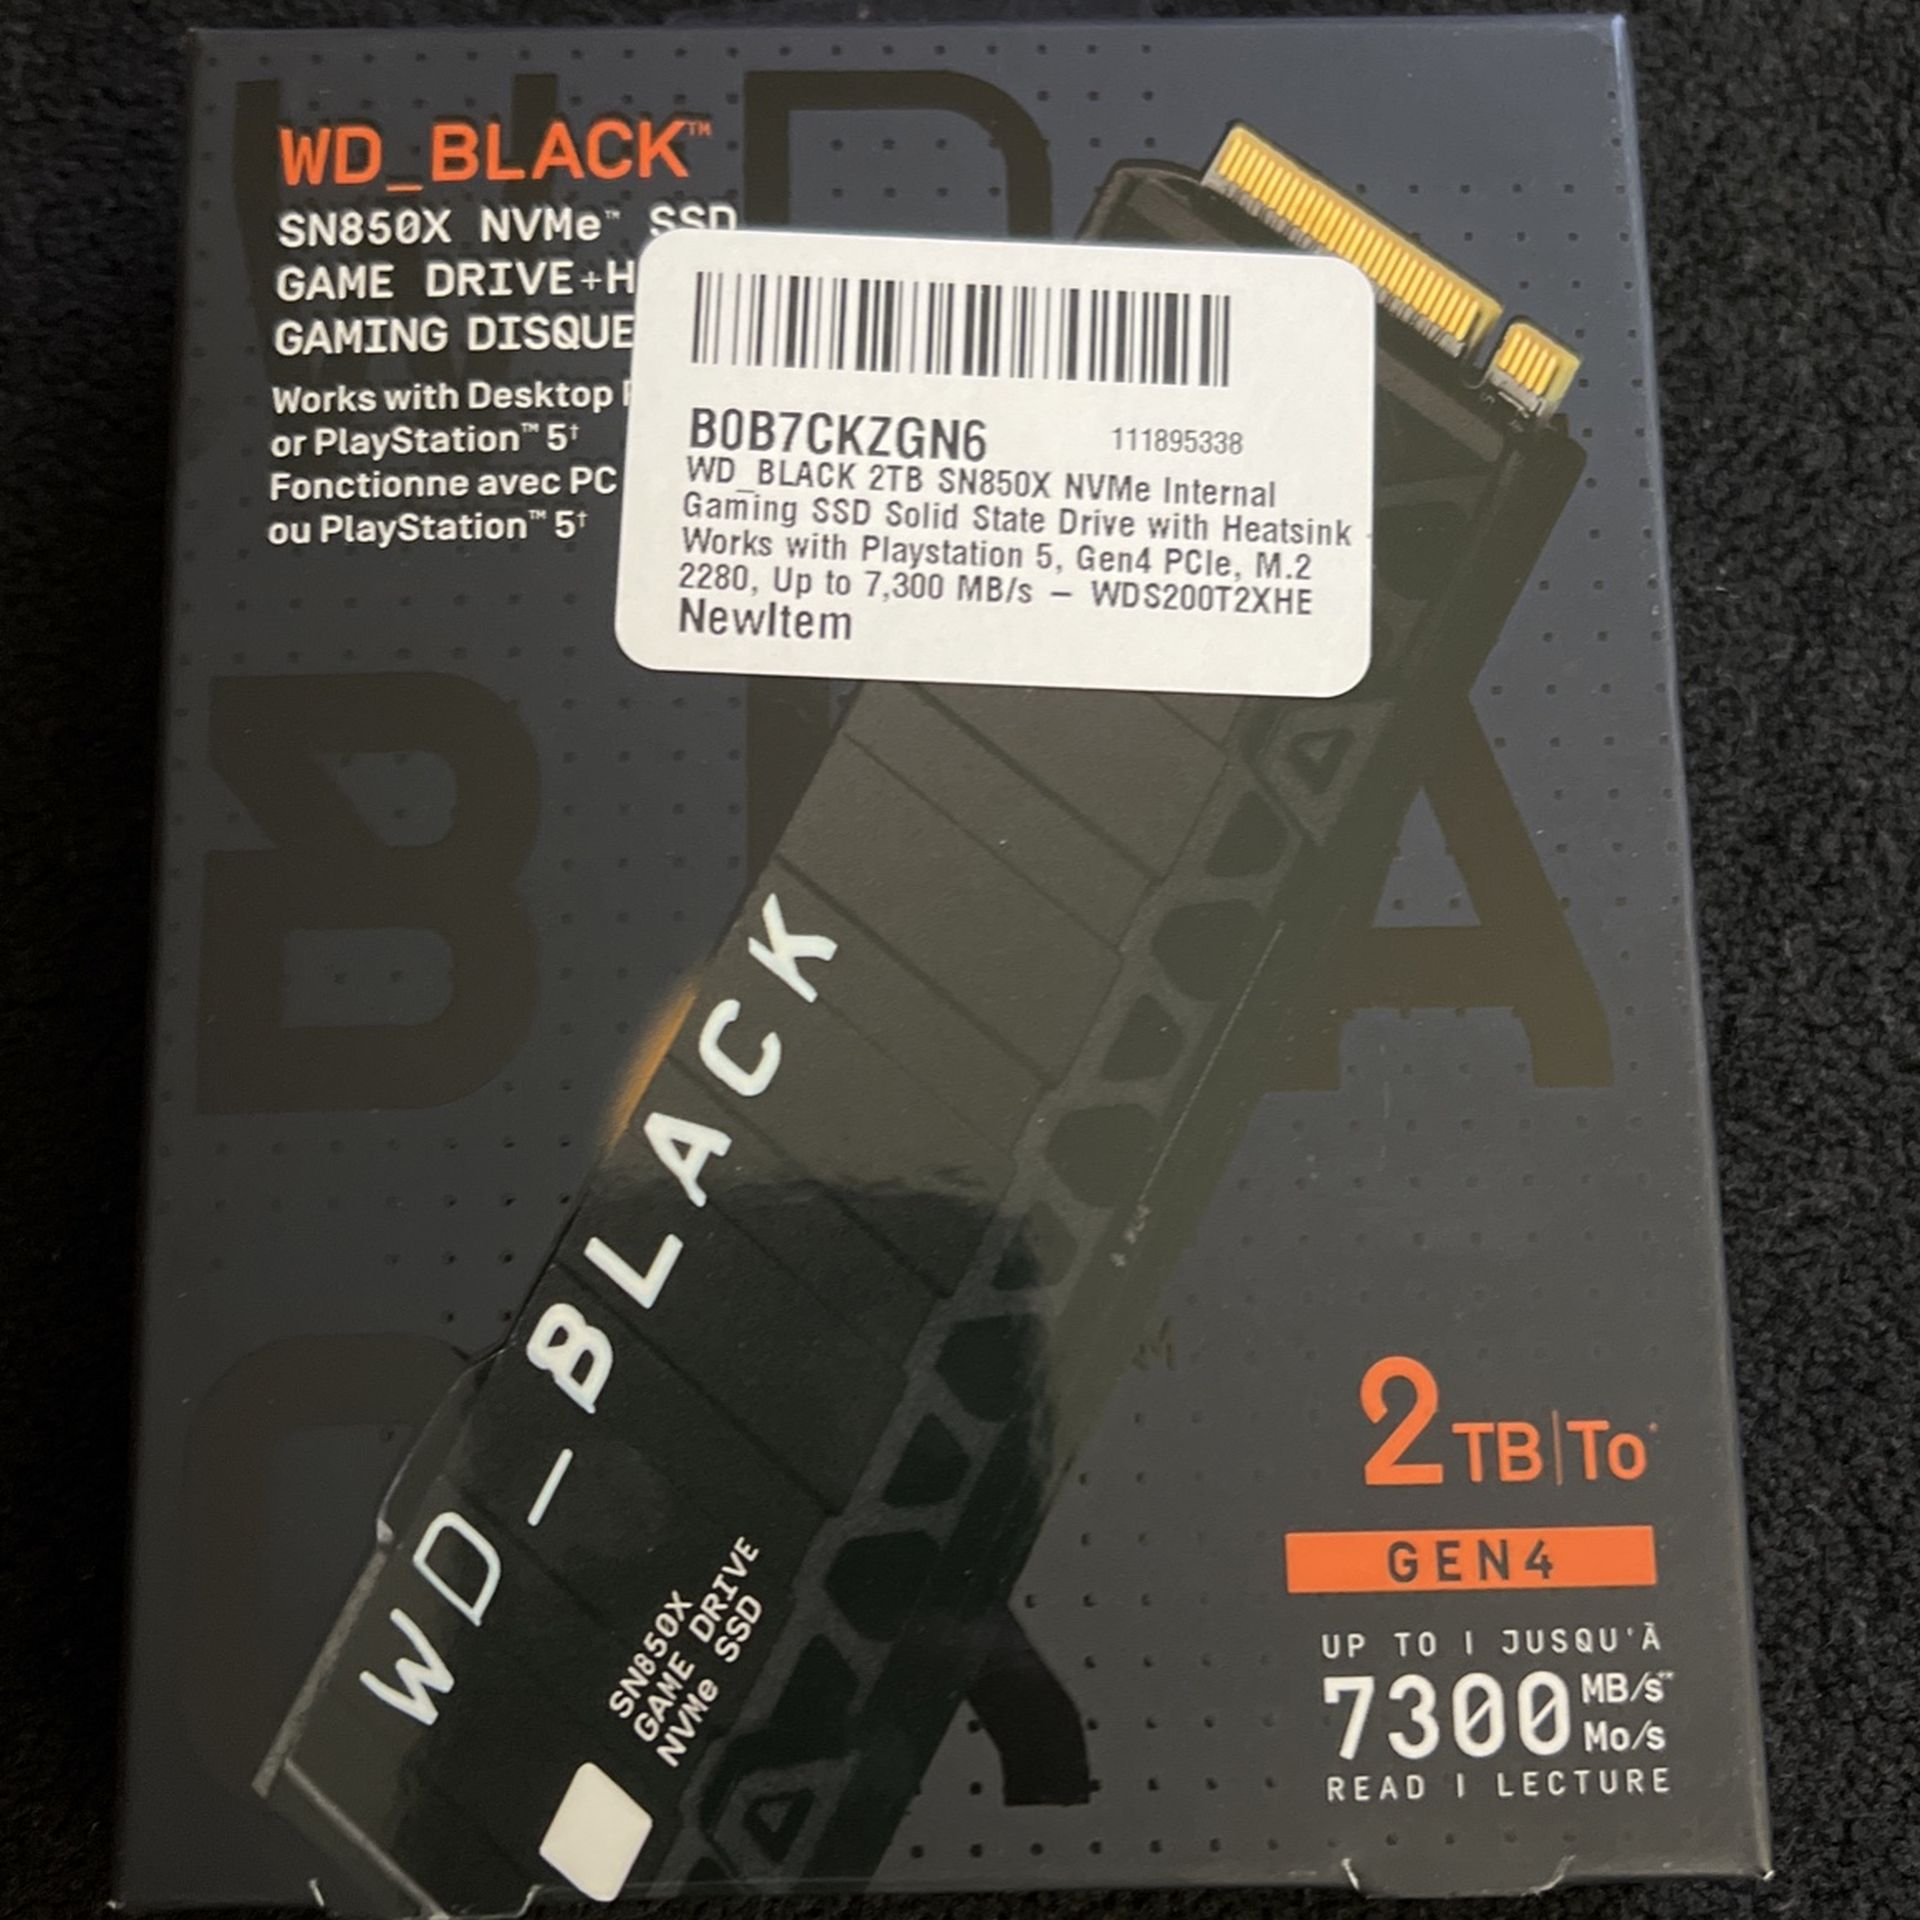  WD_BLACK 2TB SN850X NVMe Internal Gaming SSD Solid State Drive  with Heatsink - Works with Playstation 5, Gen4 PCIe, M.2 2280, Up to 7,300  MB/s - WDS200T2XHE : Electronics